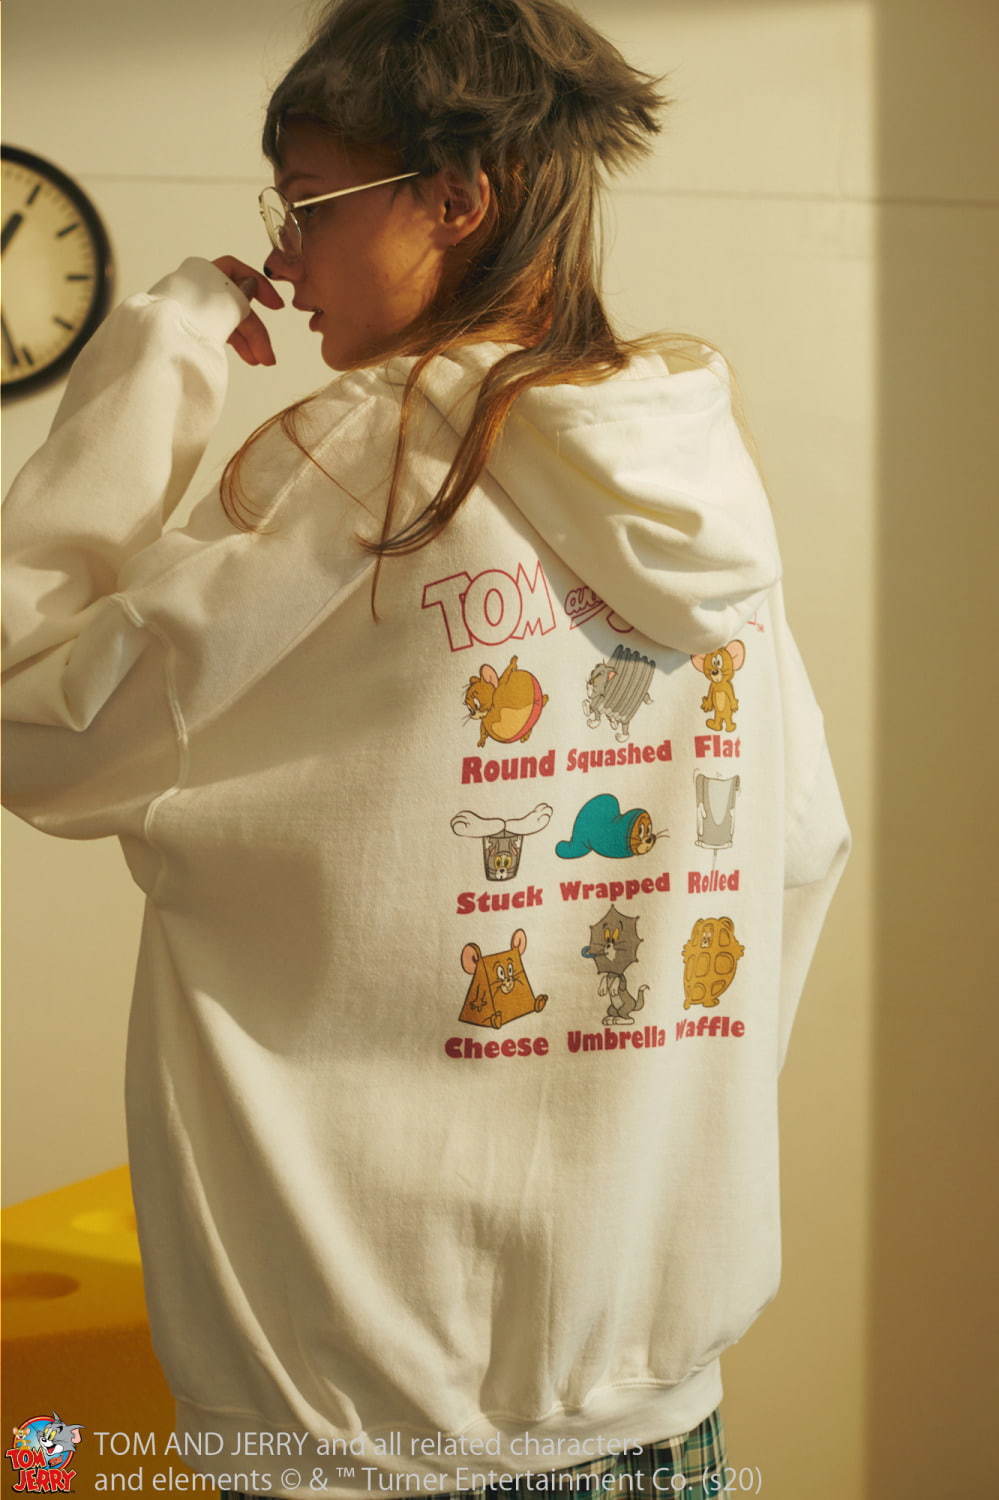 「TOM and JERRY FUNNY ARTS HOODIE」(オフホワイト)
12,000円＋税